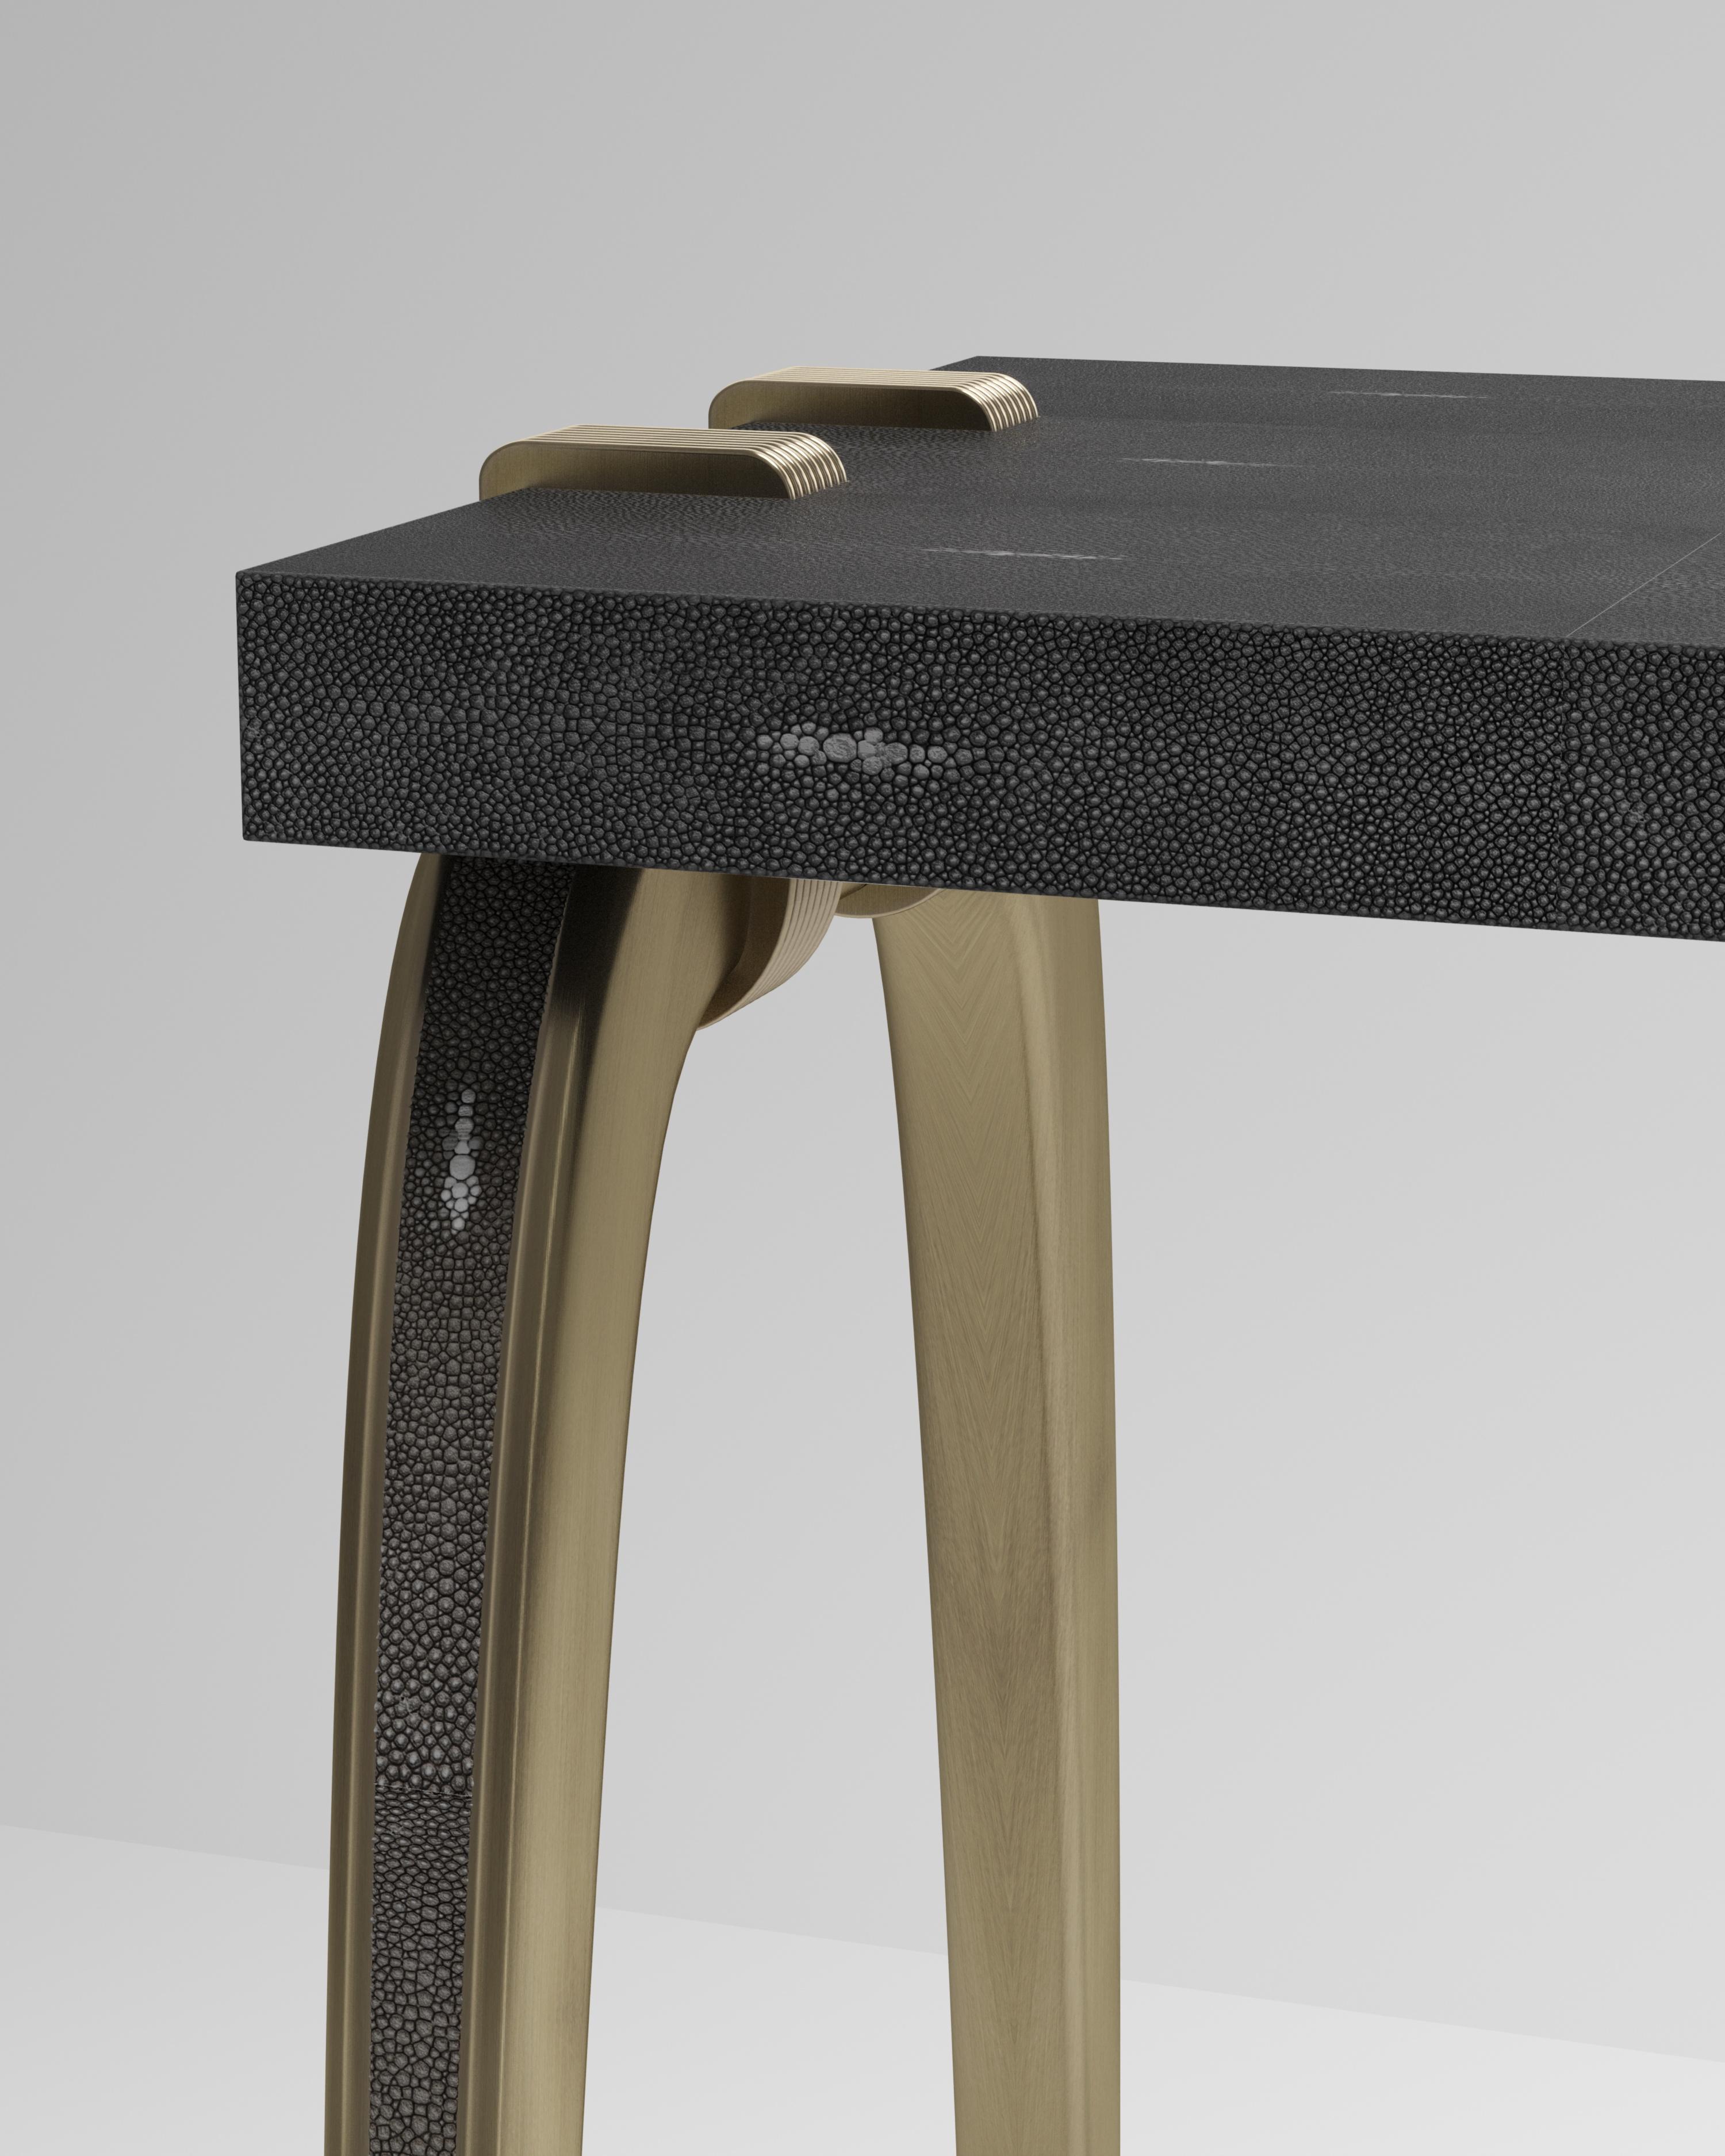 The Sonia Console table is an iconic Augousti design, showcasing the exquisite craftmanship behind the brand. The shagreen inlaid legs clasp onto the side of the black shagreen rectangle top. This piece is a nod to the Art-Deco period while